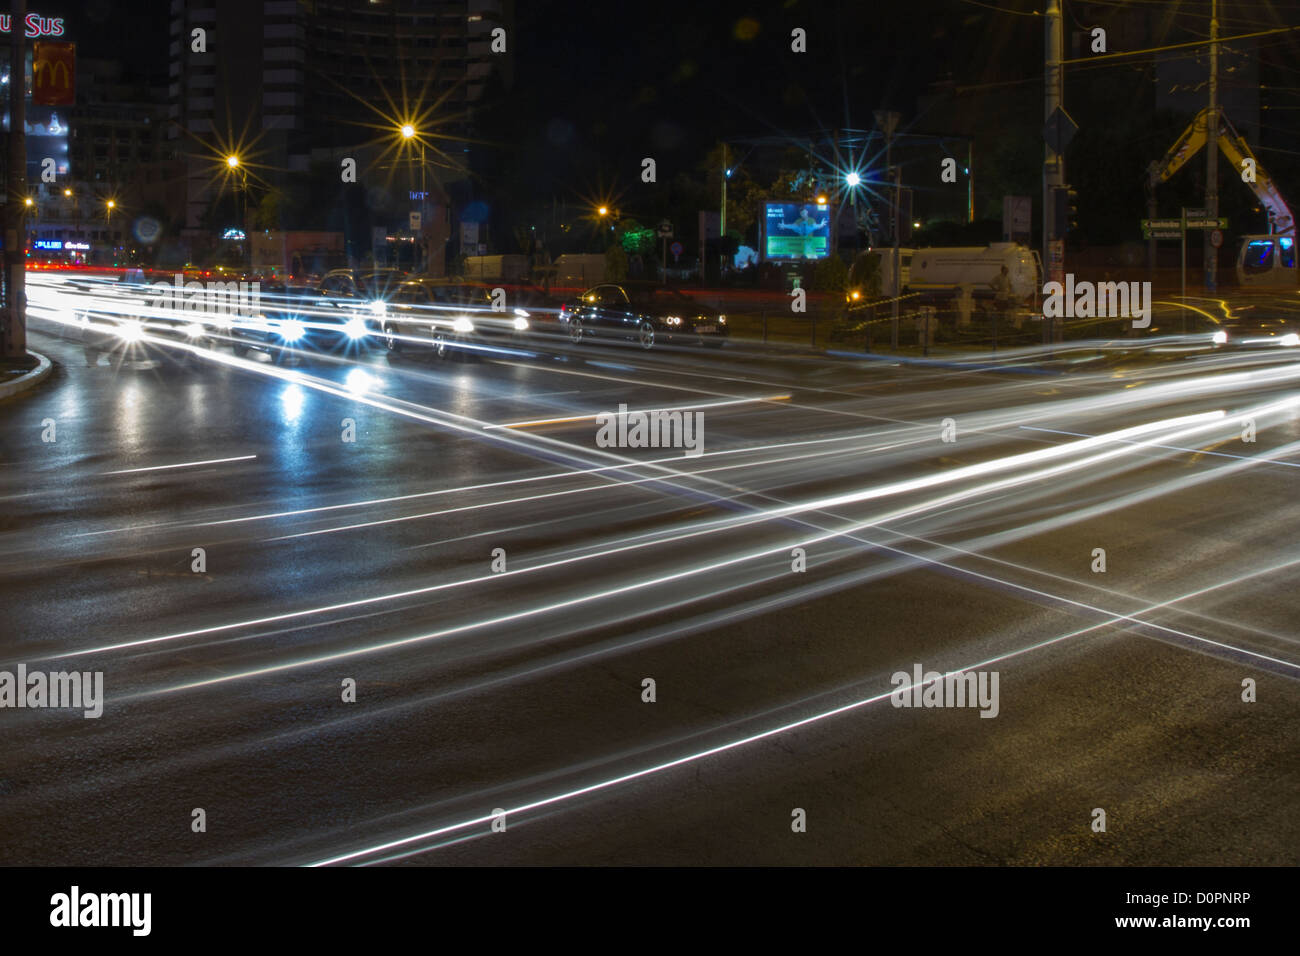 Cars passing by in a crossroad by night Stock Photo